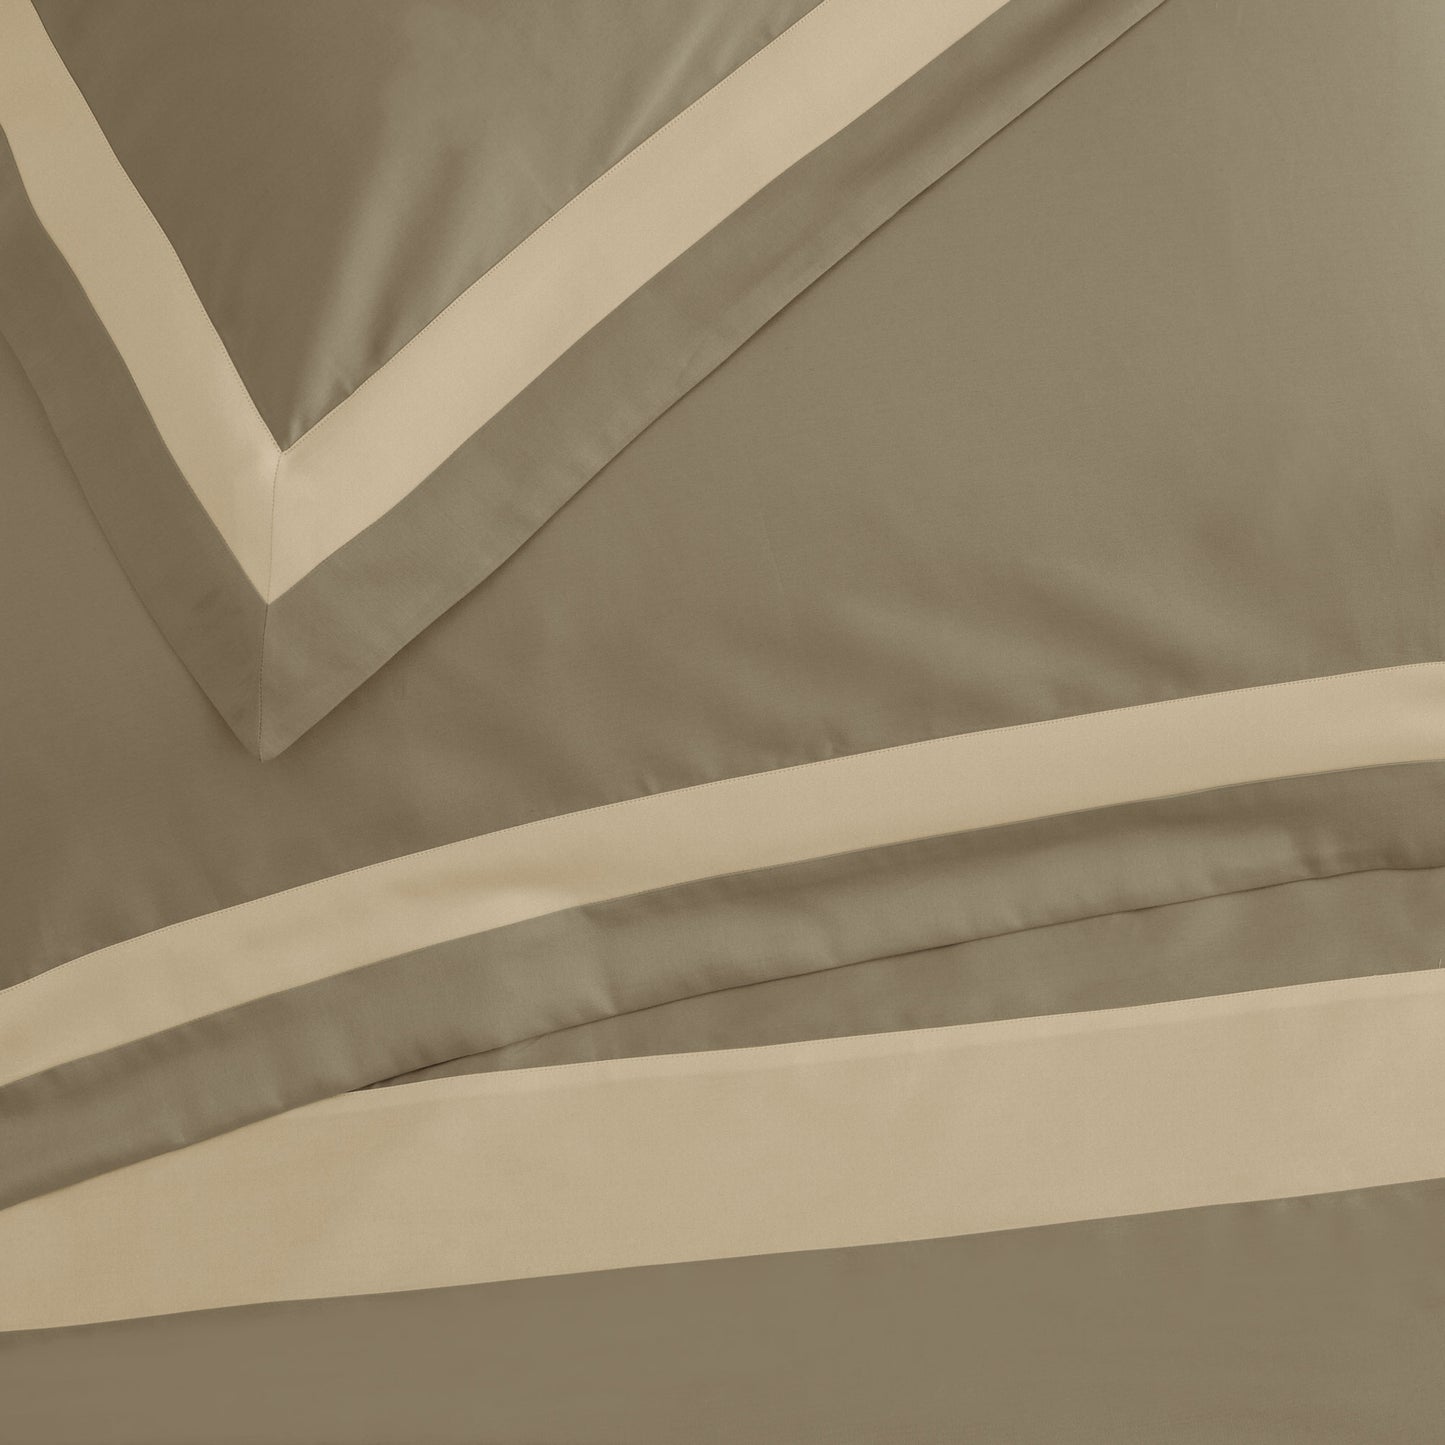 Duvet cover set in 300TC Cotton Satin with Contrasting border - Arch